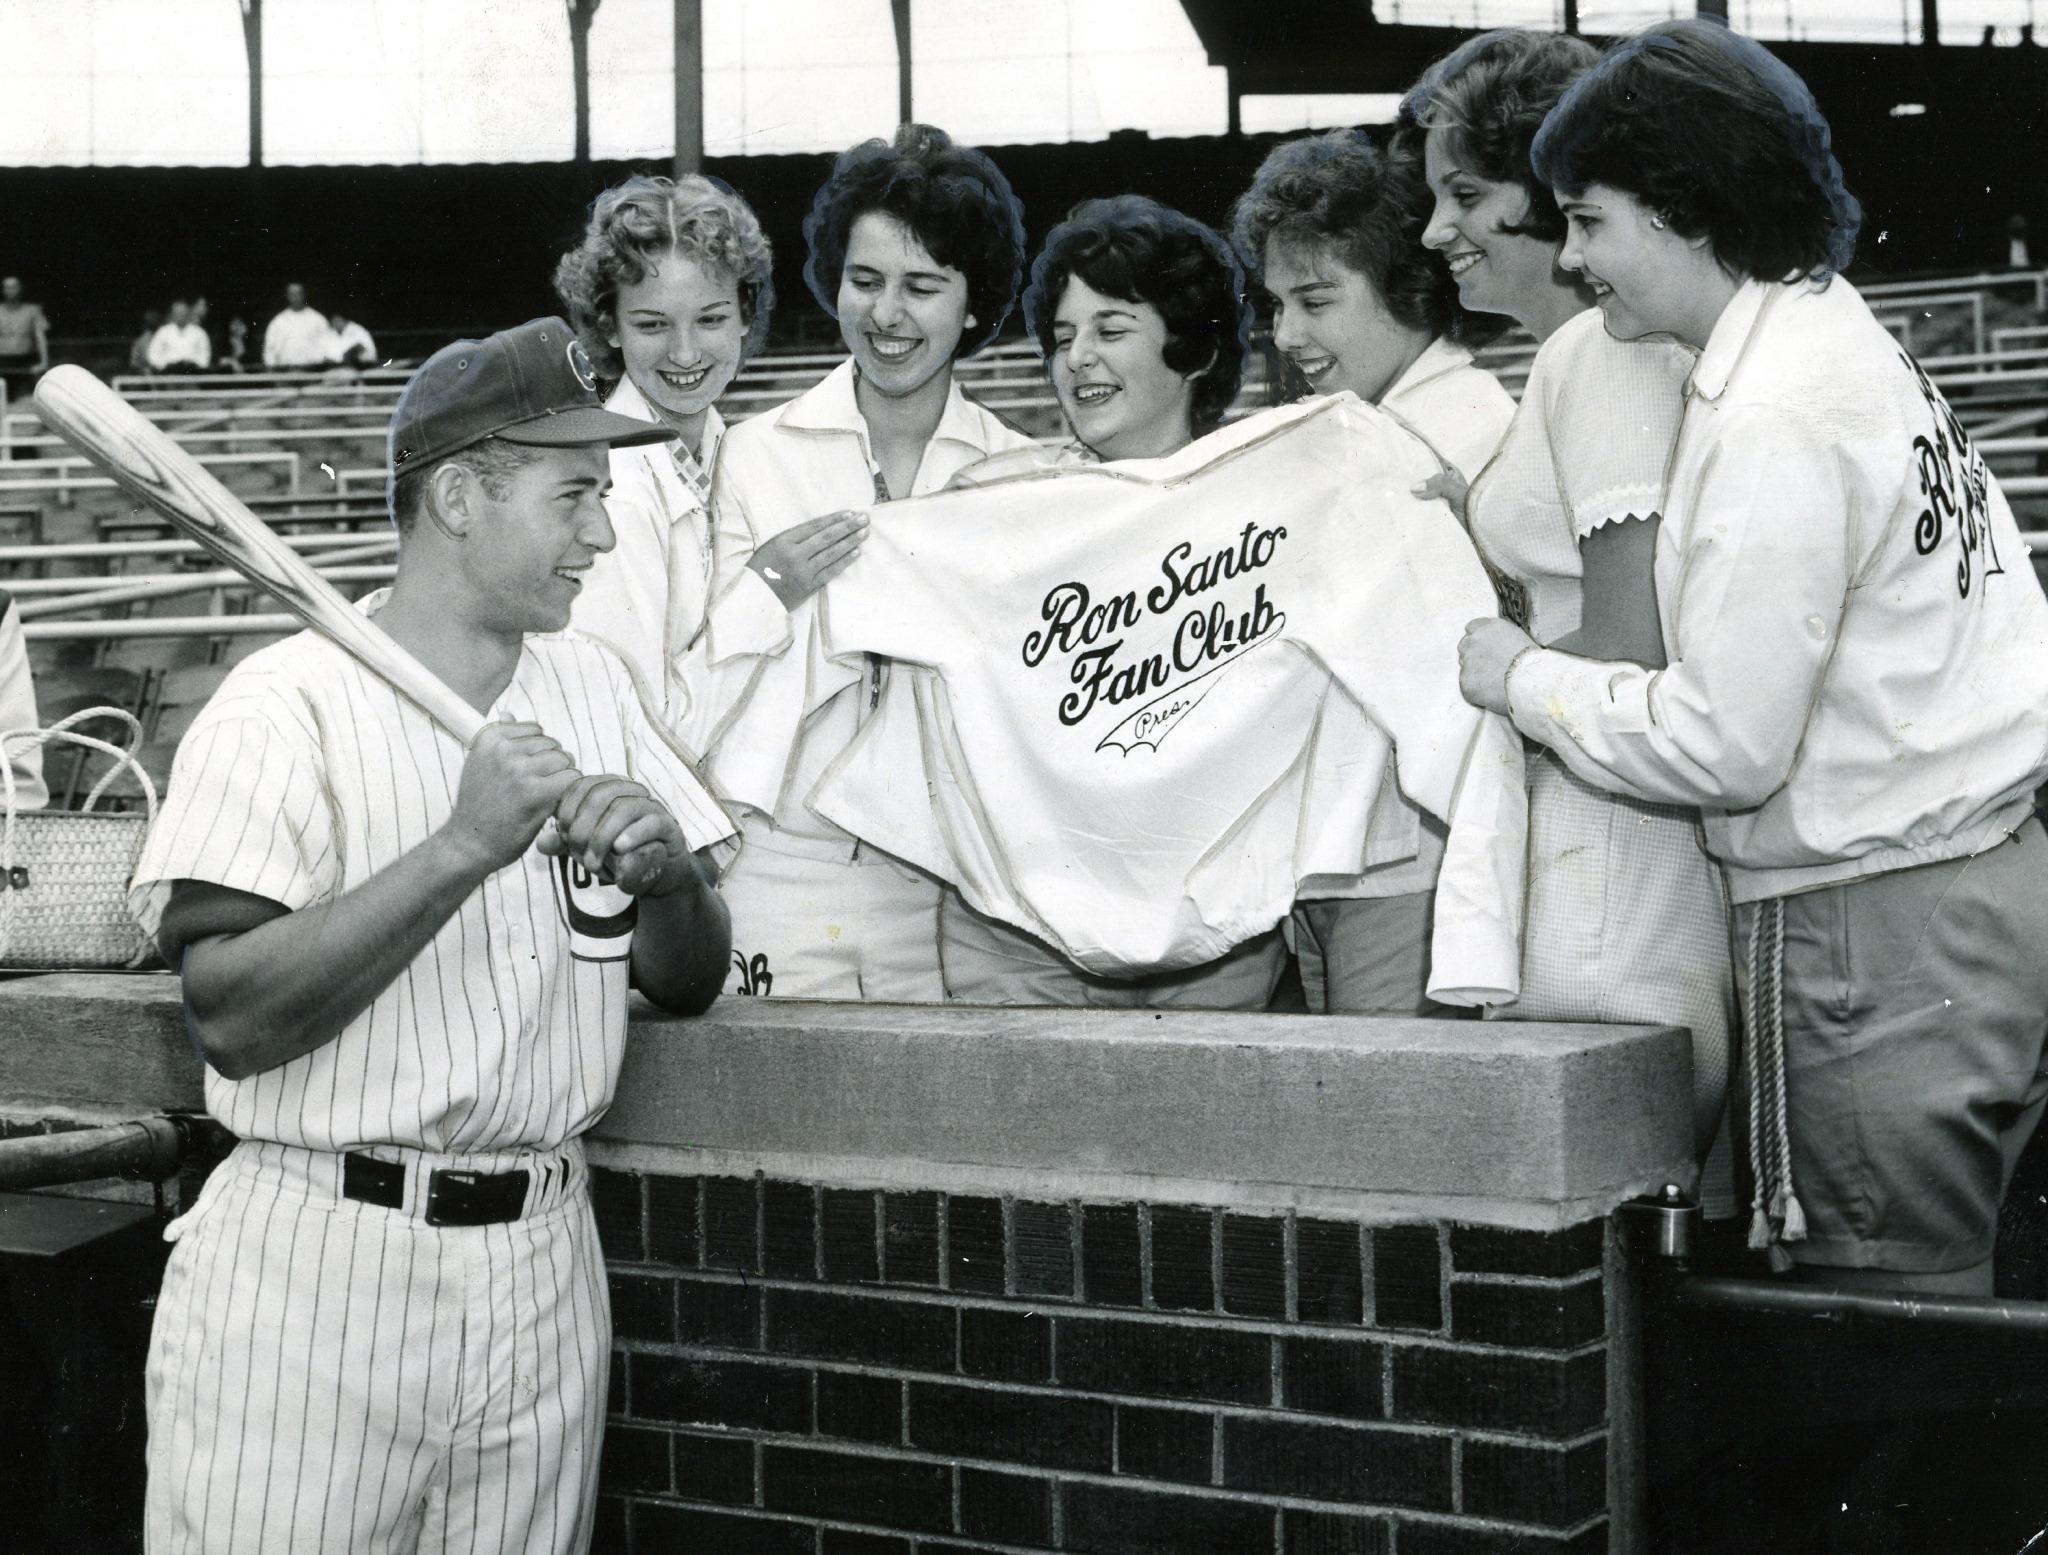   Happy Birthday to Ron Santo. You are missed.   